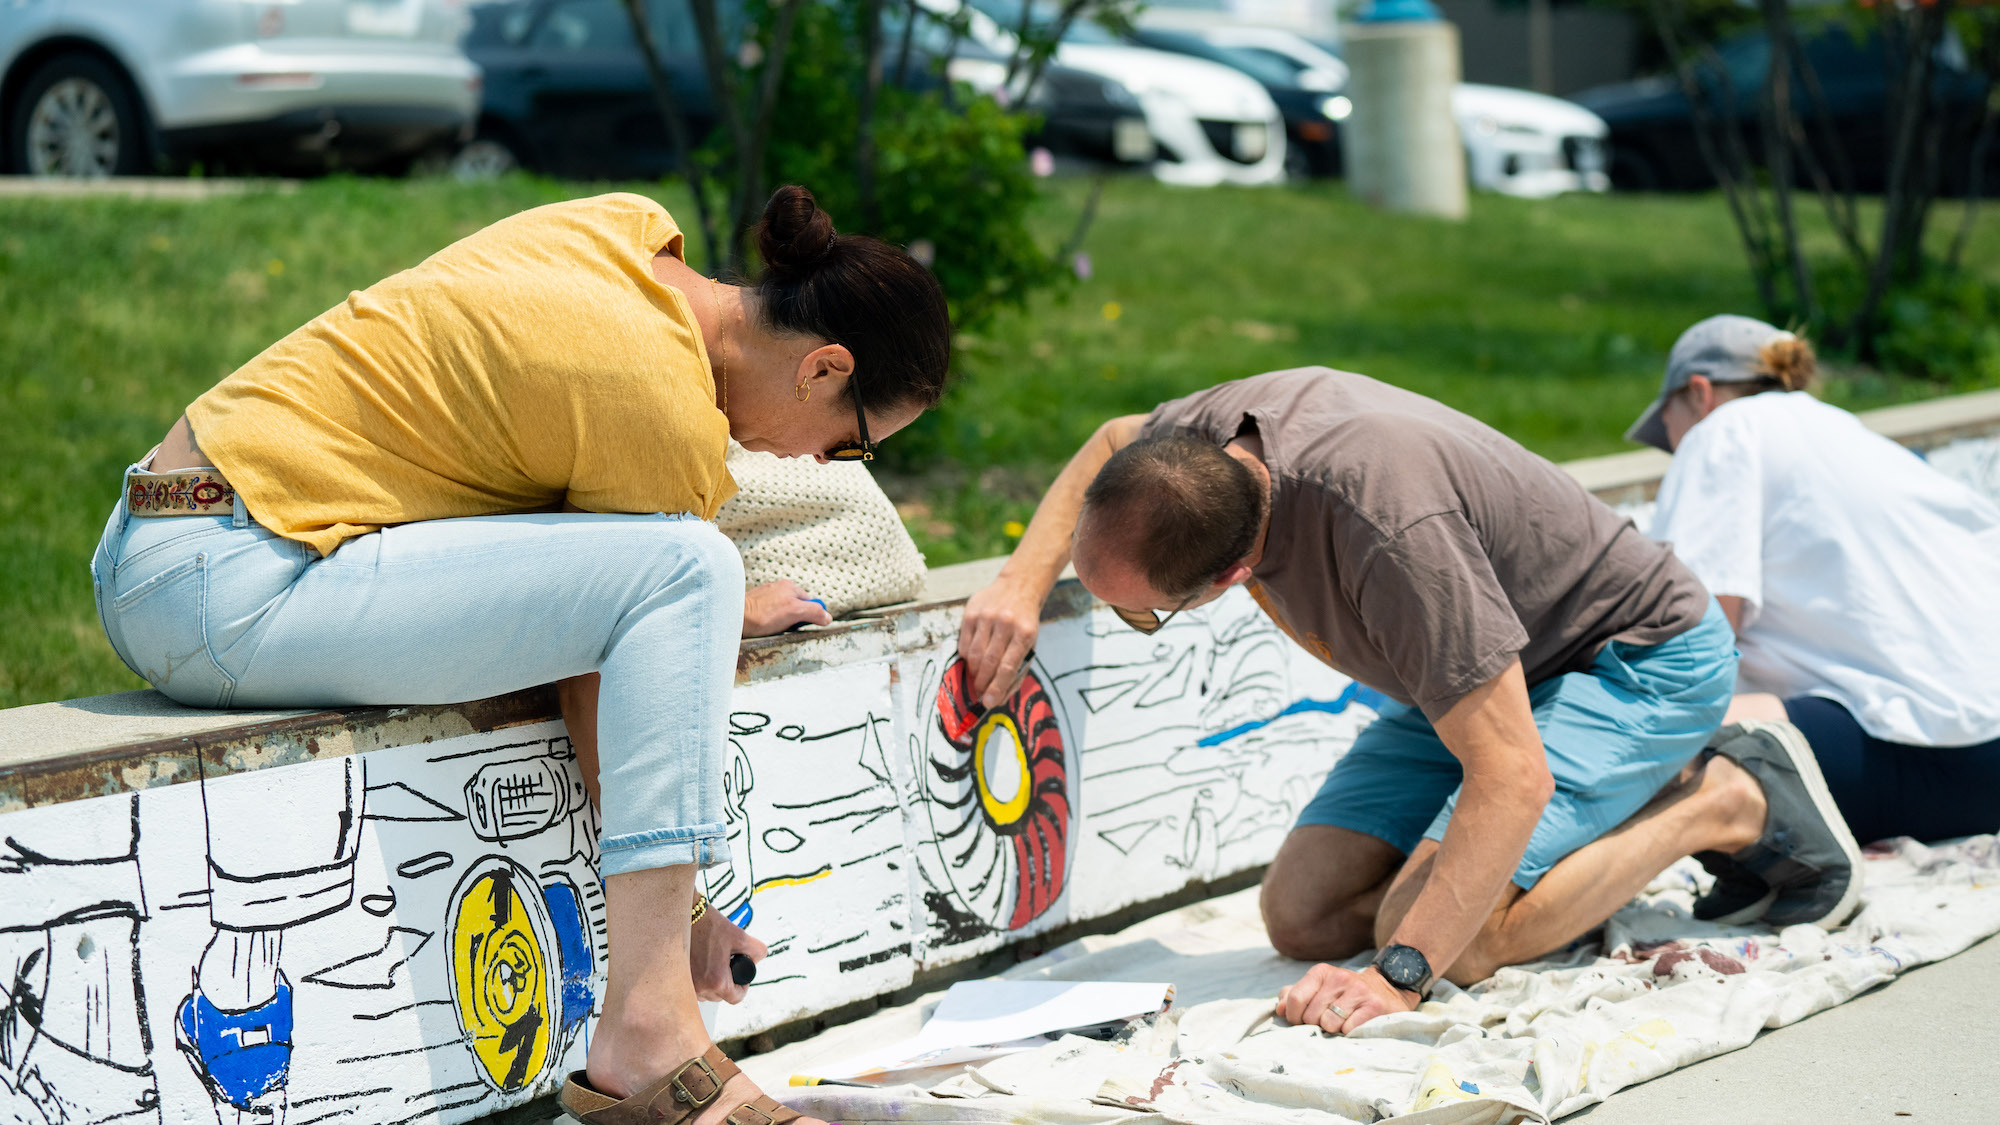 participants paint in a public skatepark as part of the Mississauga movement series